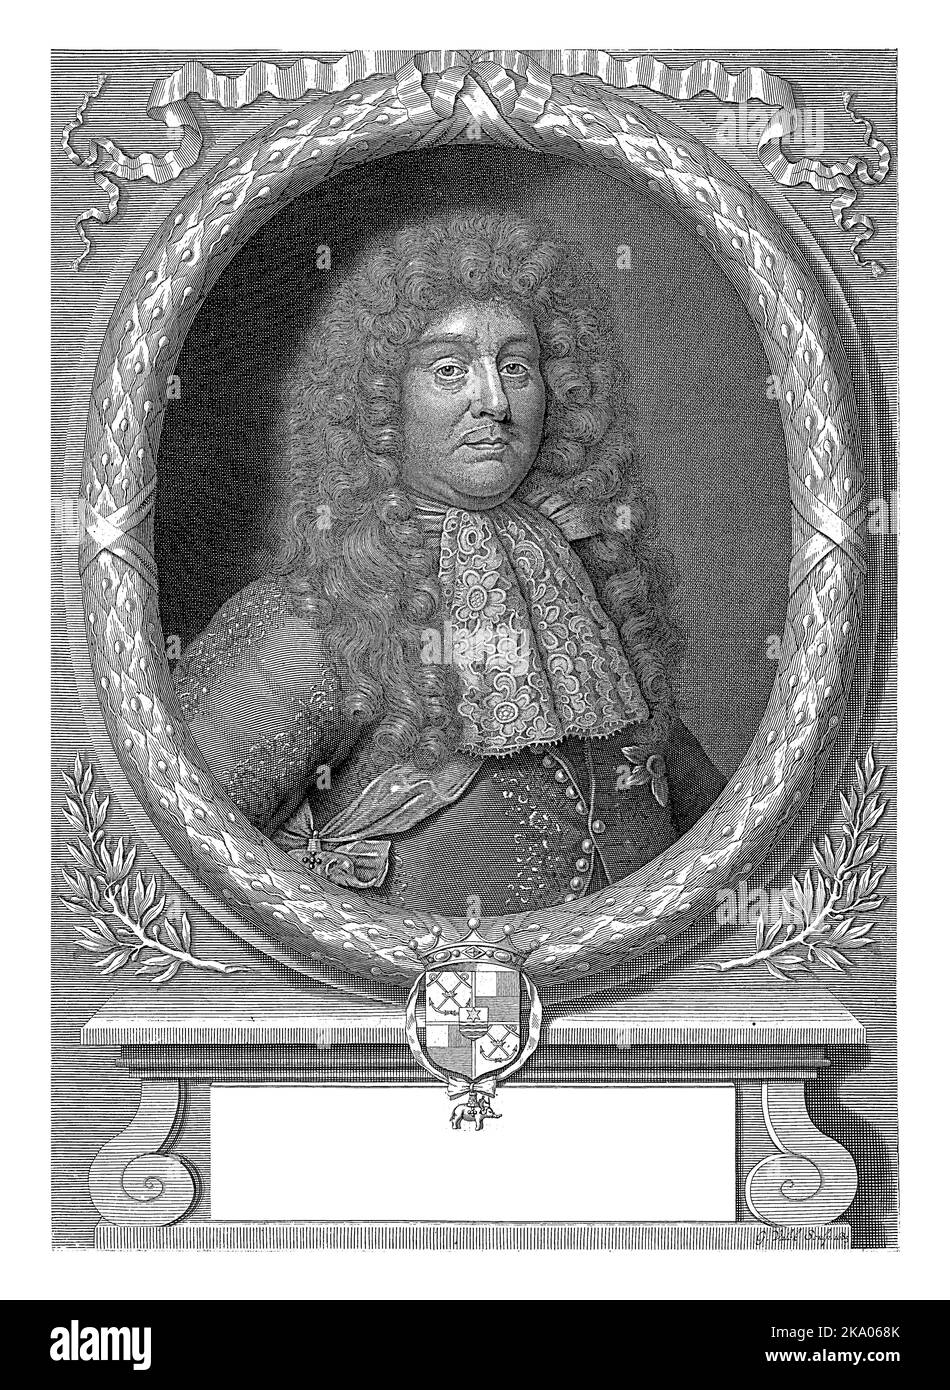 Portrait of Janus Juell, Baron de Juling, with lace tie and the sign of the Order of the Elephant. Stock Photo